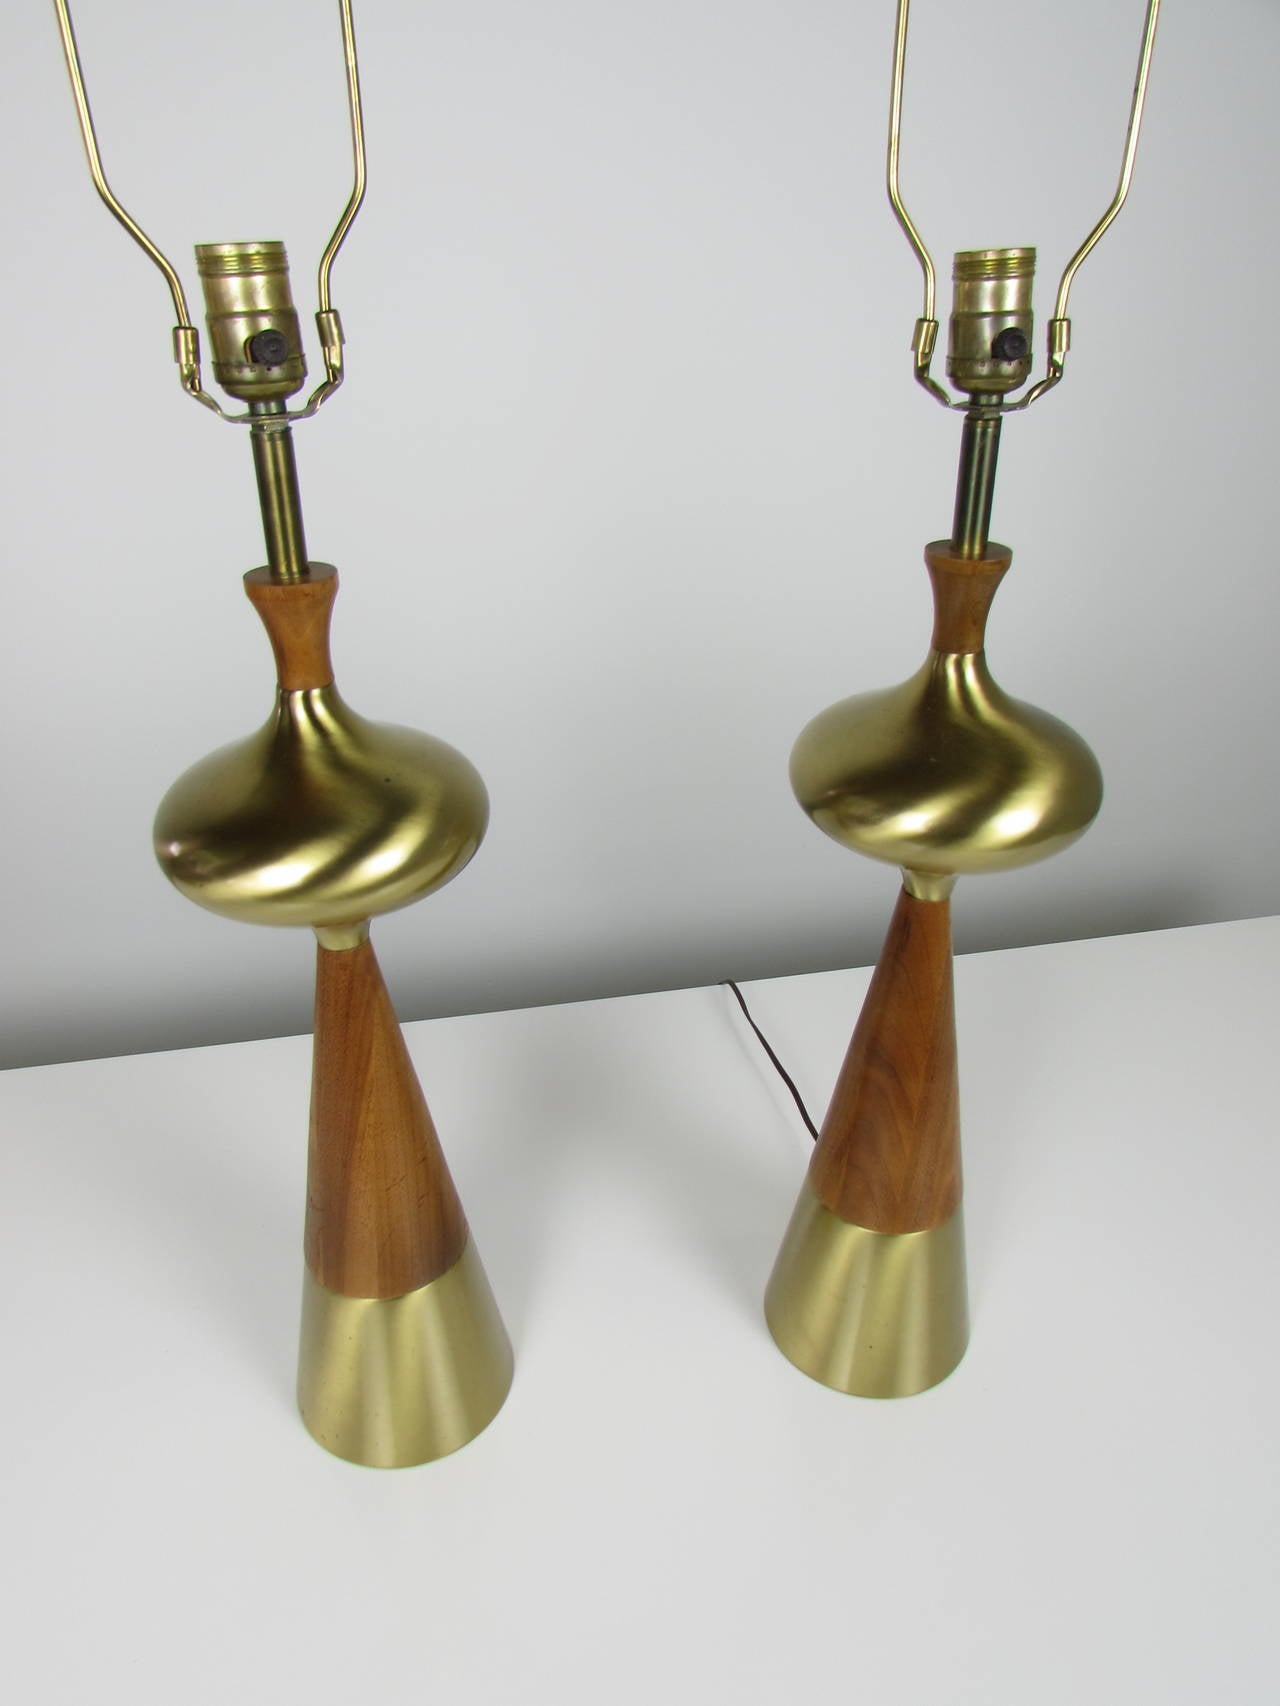 American Voluptuous Table Lamps in Walnut and Brass by Tony Paul for Westwood, 1950s